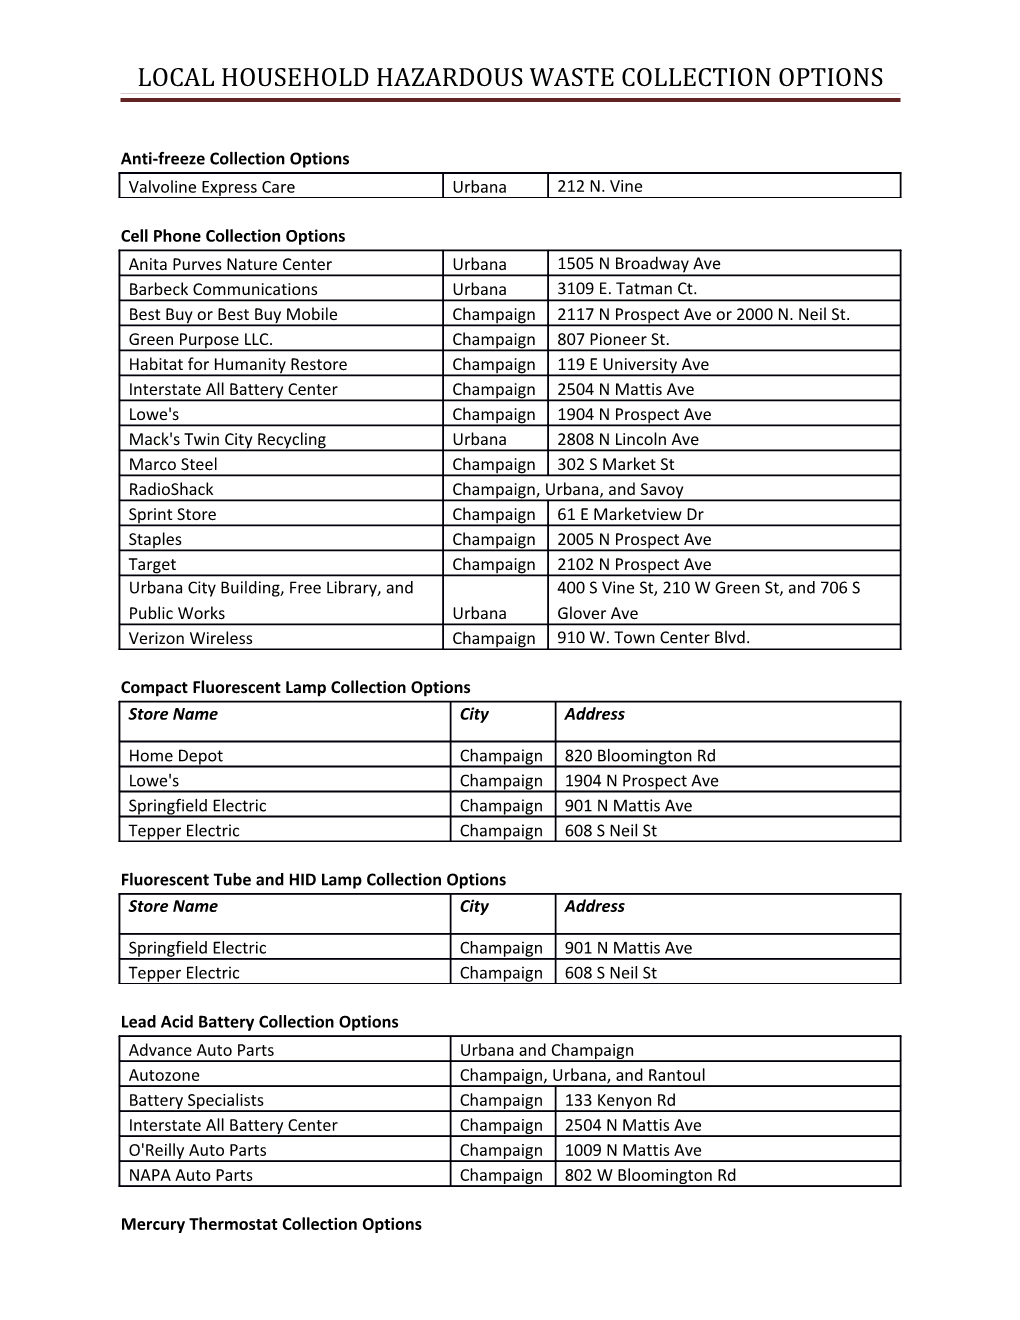 Local Household Hazardous Waste Collection Options